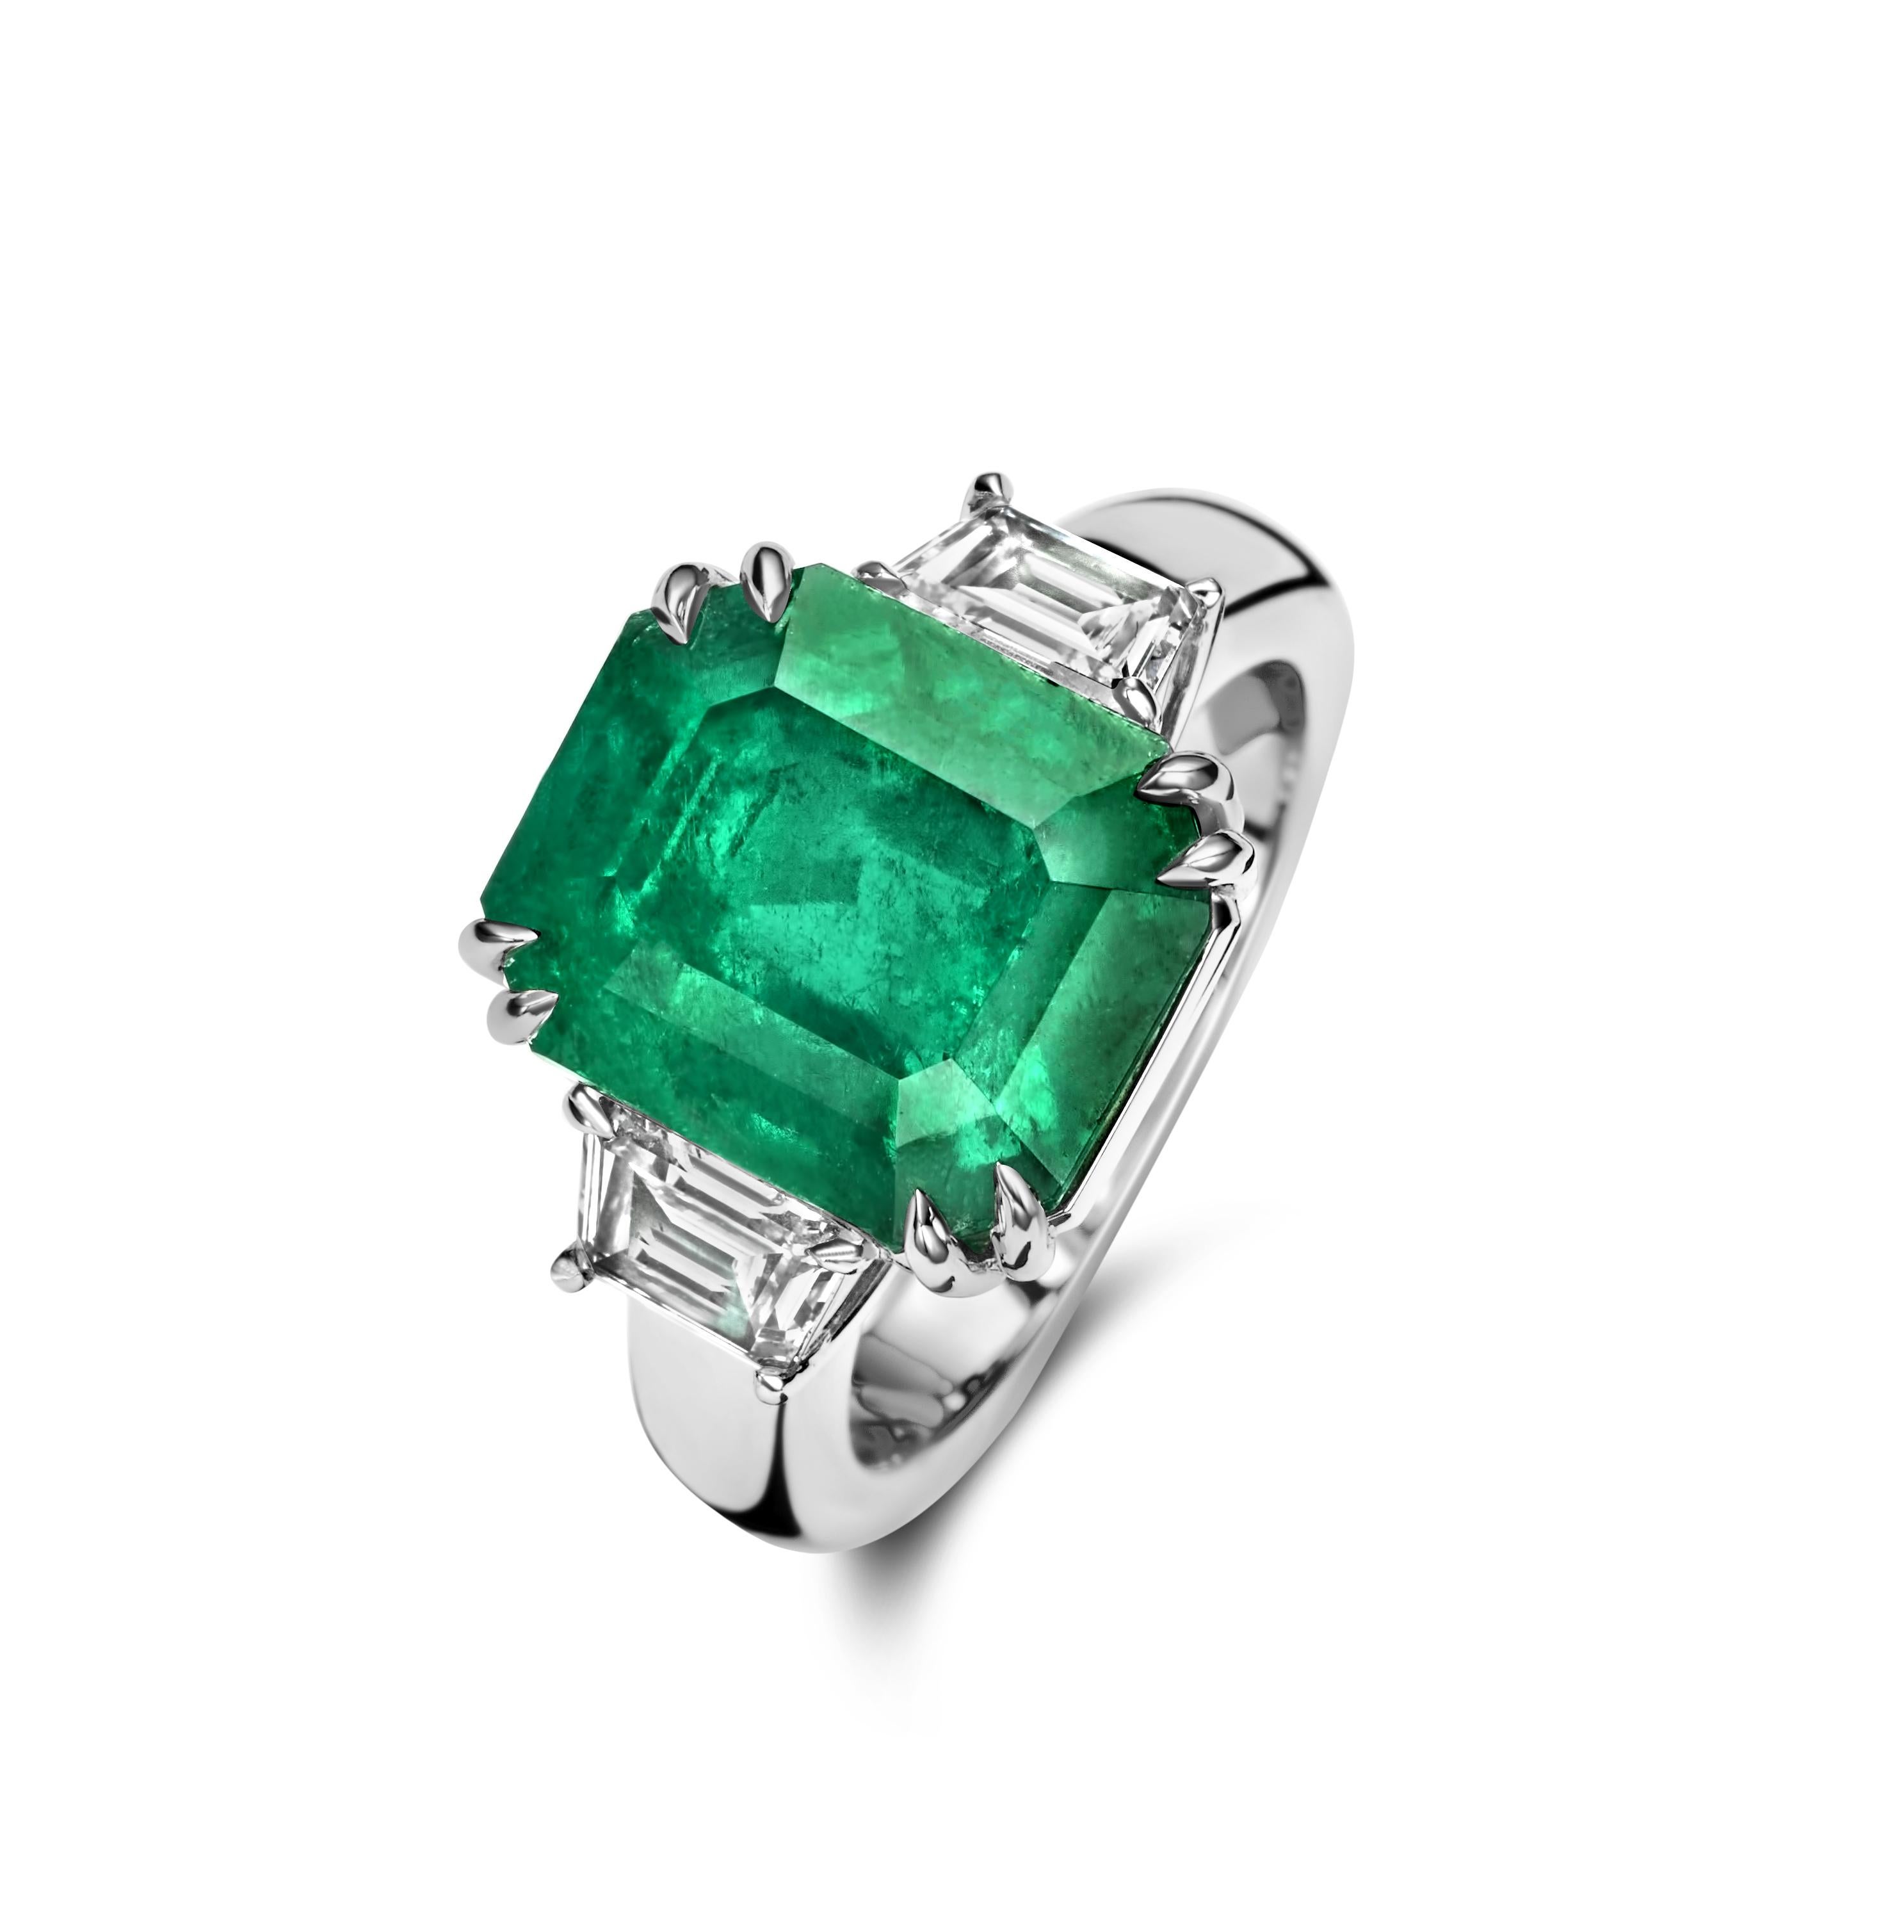 18kt white gold Cocktail Ring 8.267ct Emerald, 2.84ct Diamond,  SSEF Certified

Beautiful 18 kt white golden ring with big green emerald stone and 2 rectangle diamonds.

Emerald is a stone of inspiration and infinite patience, it embodies unity,